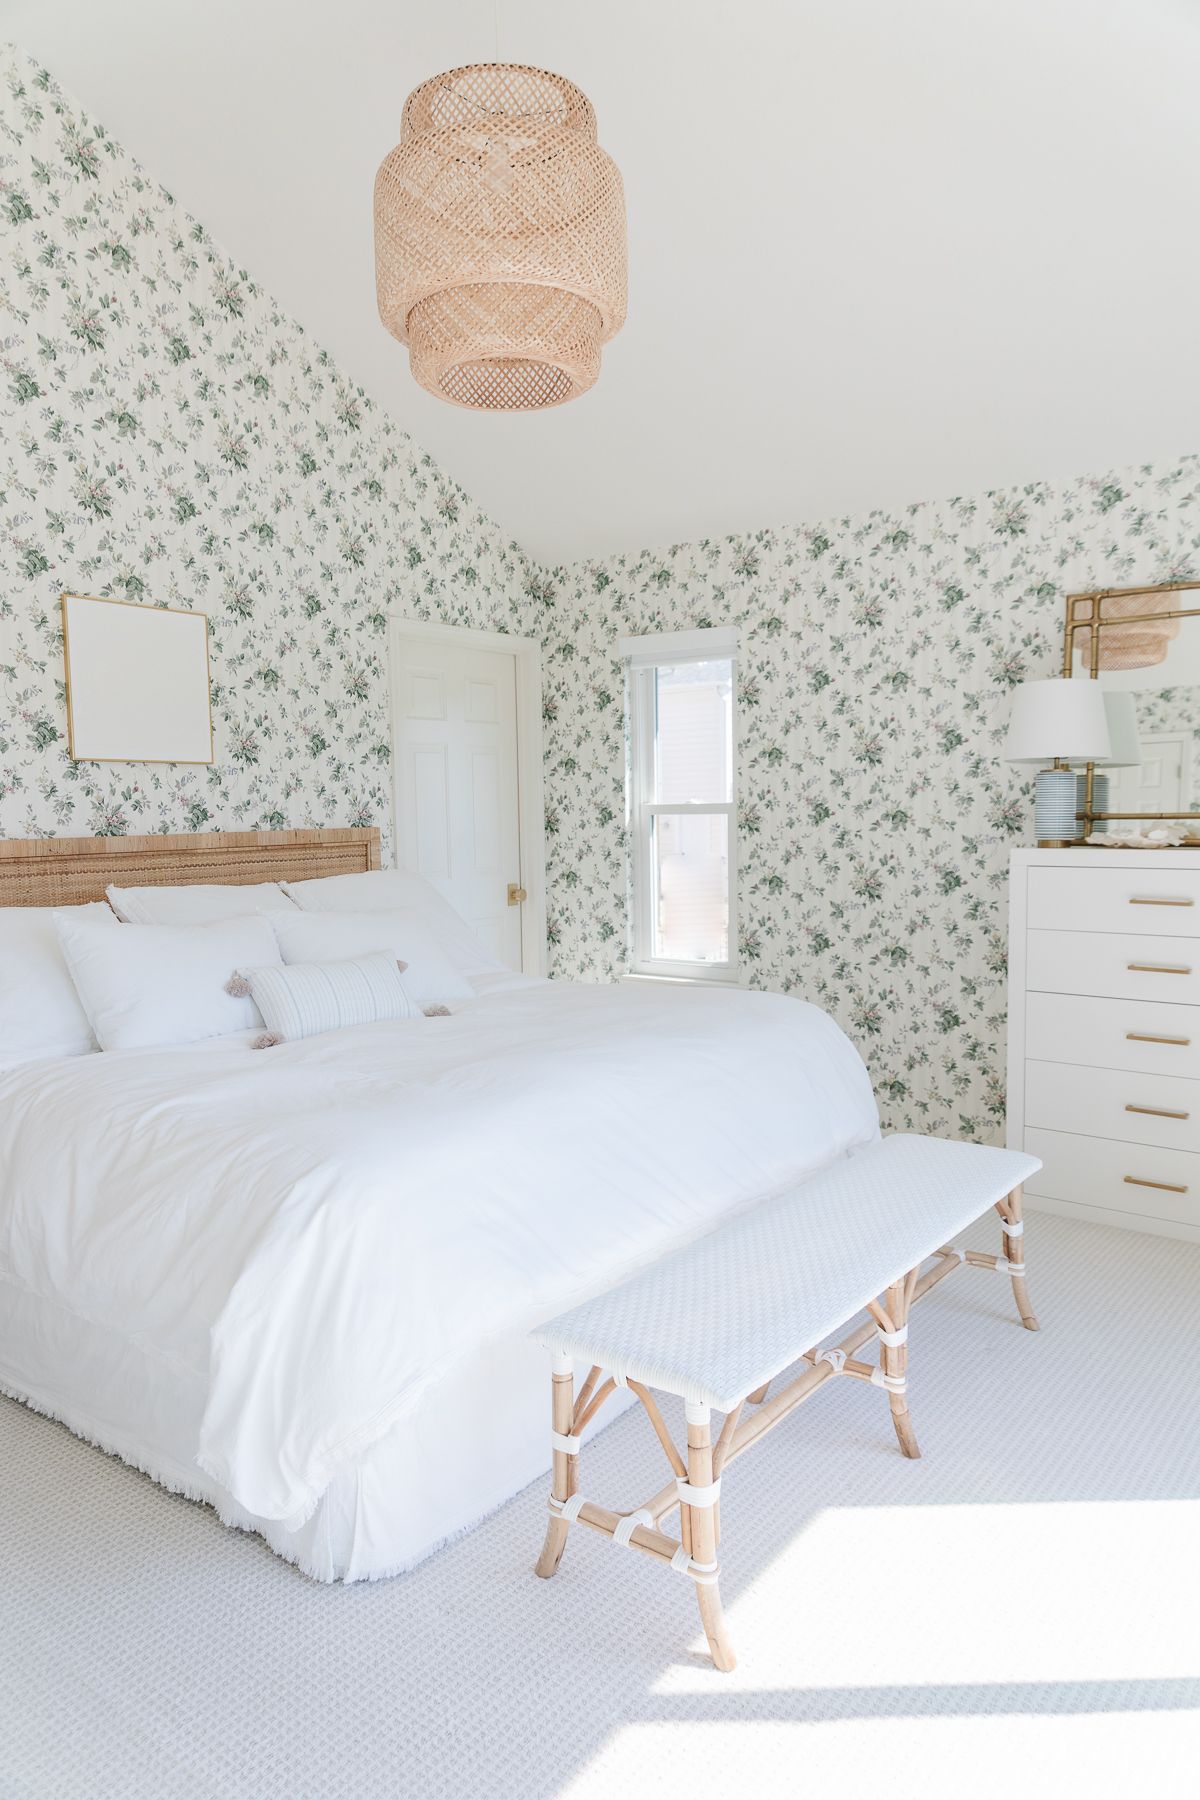 A coastal bedroom with floral wallpaper and a rattan headboard bench and light fixture TeamJiX